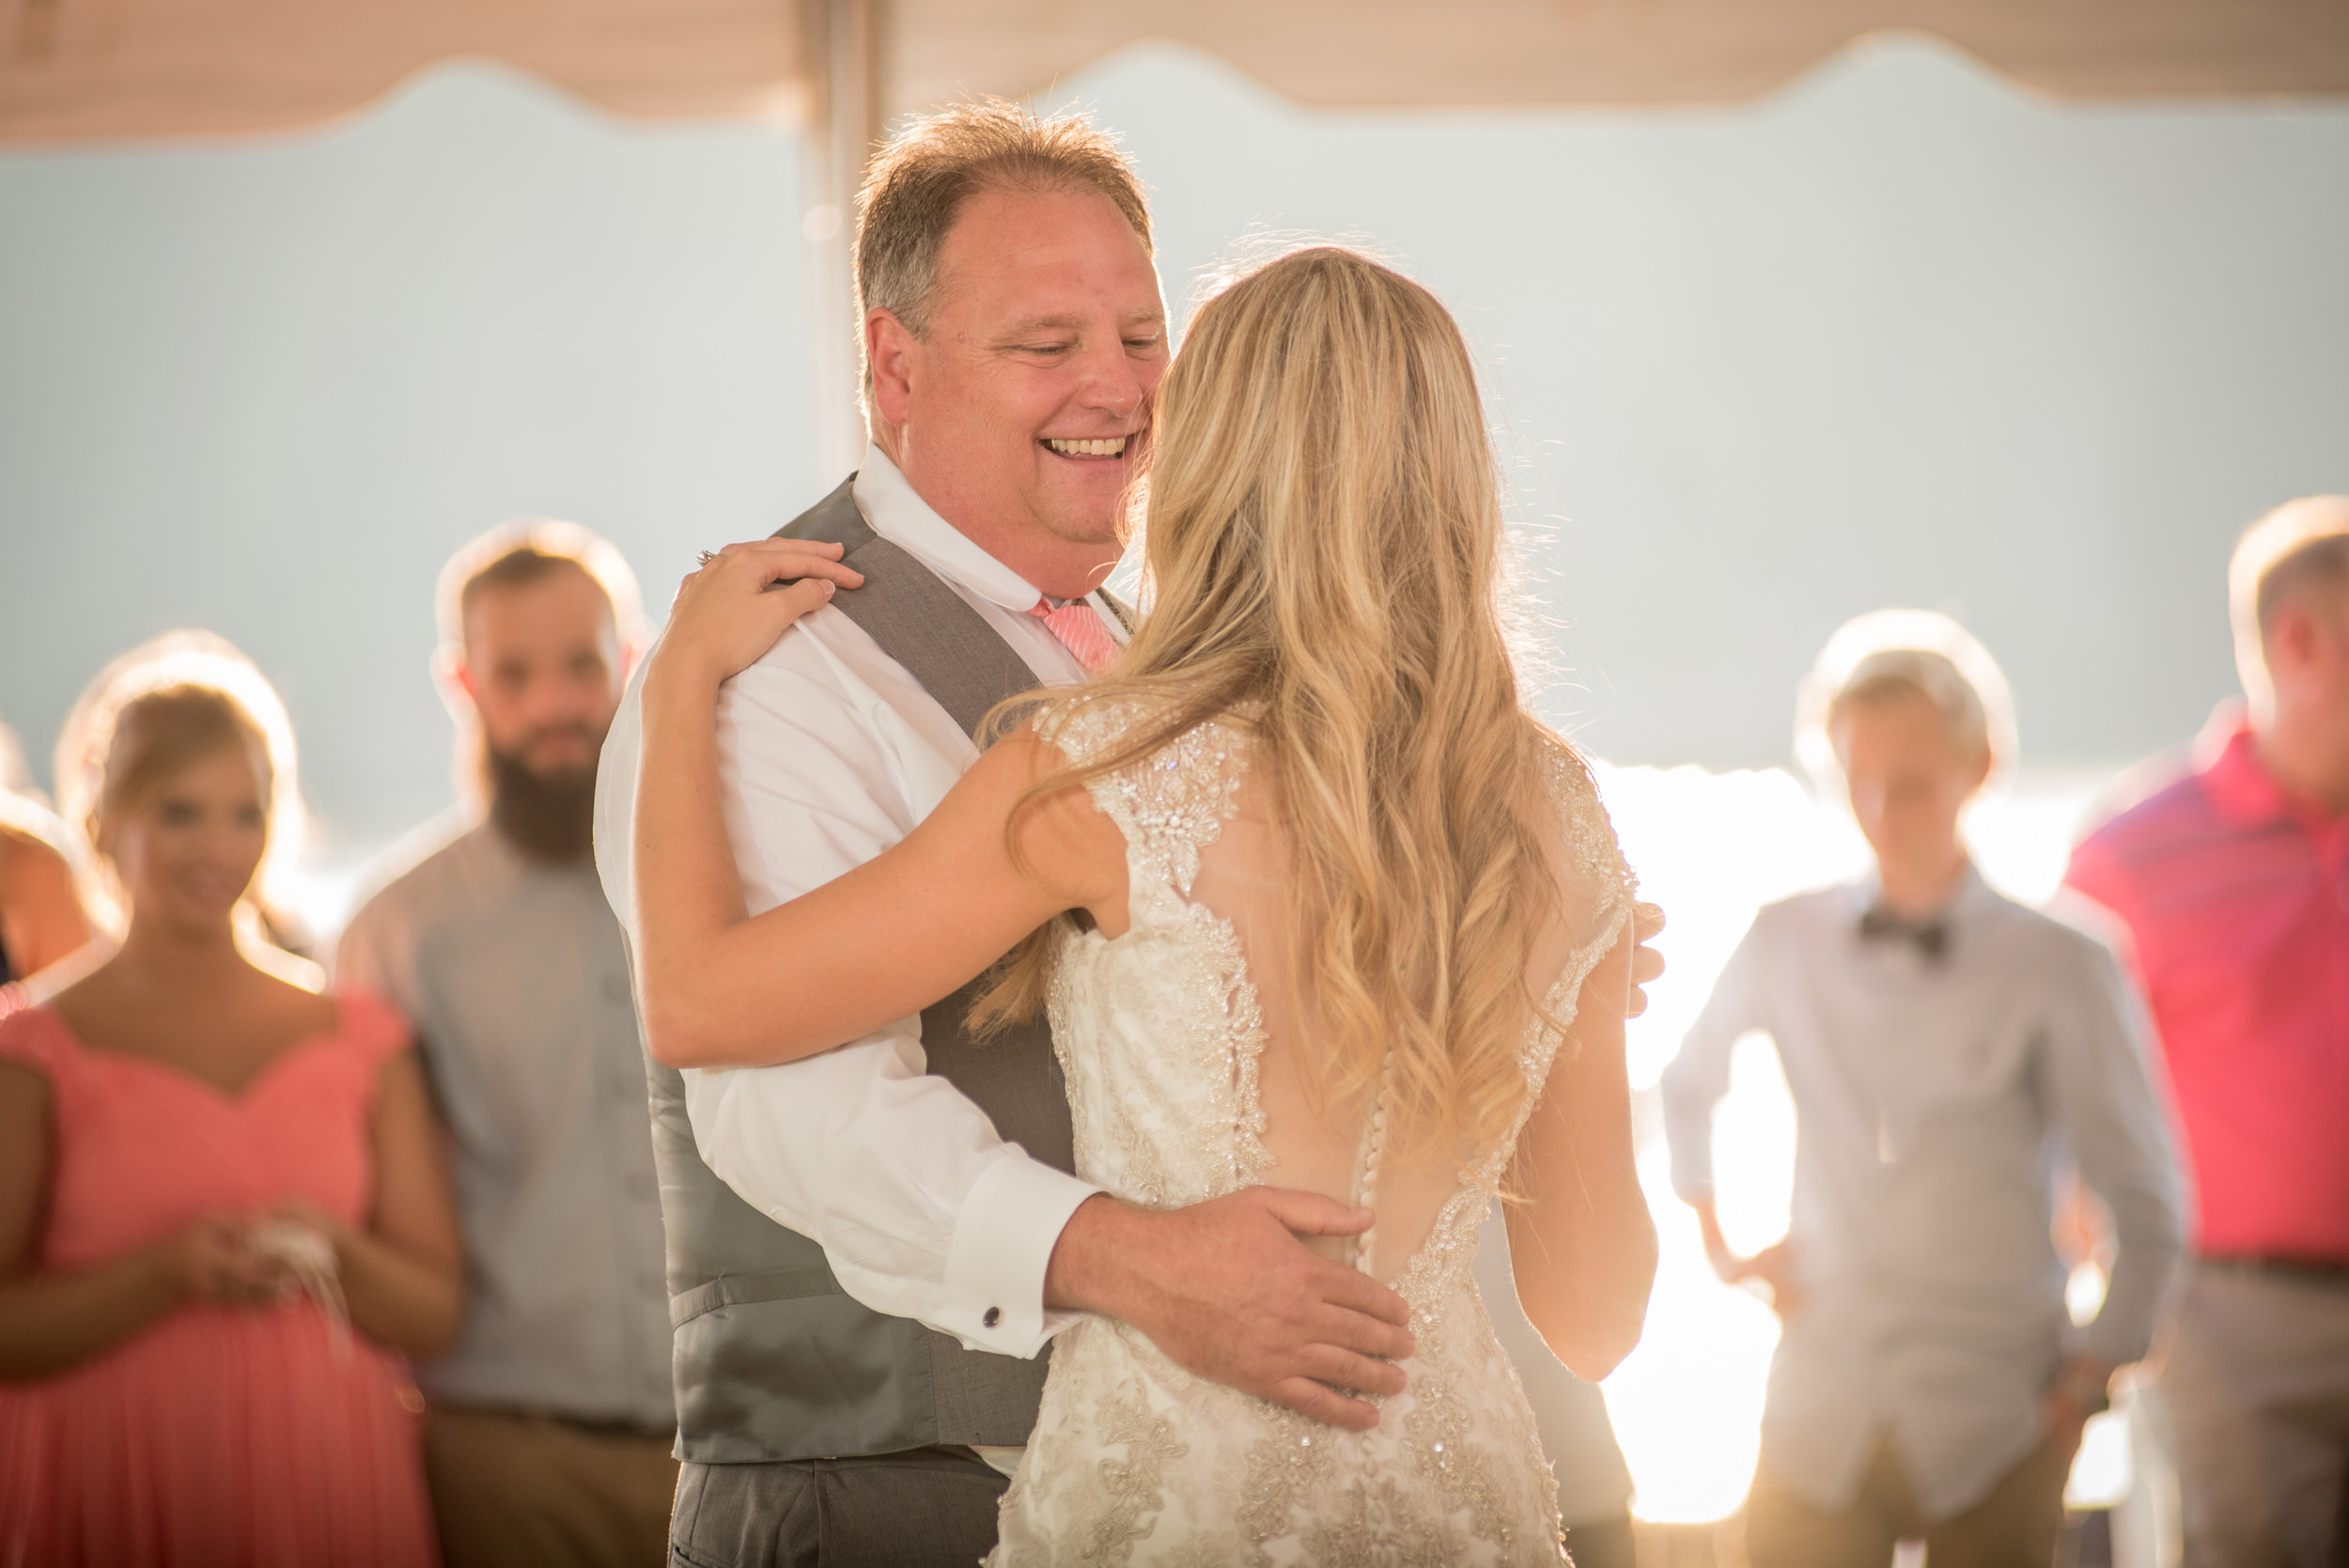  Of course, Dad could not let the Groom have all the fun so he &amp; Leah did a coregraphed dance to a mix of songs that included: "Daughters"-John Mayer, "Grease Lightning", "Apache"- Sugarhill, "Jump On it" and lastly "Stayin' Alive" by the Bee Gee